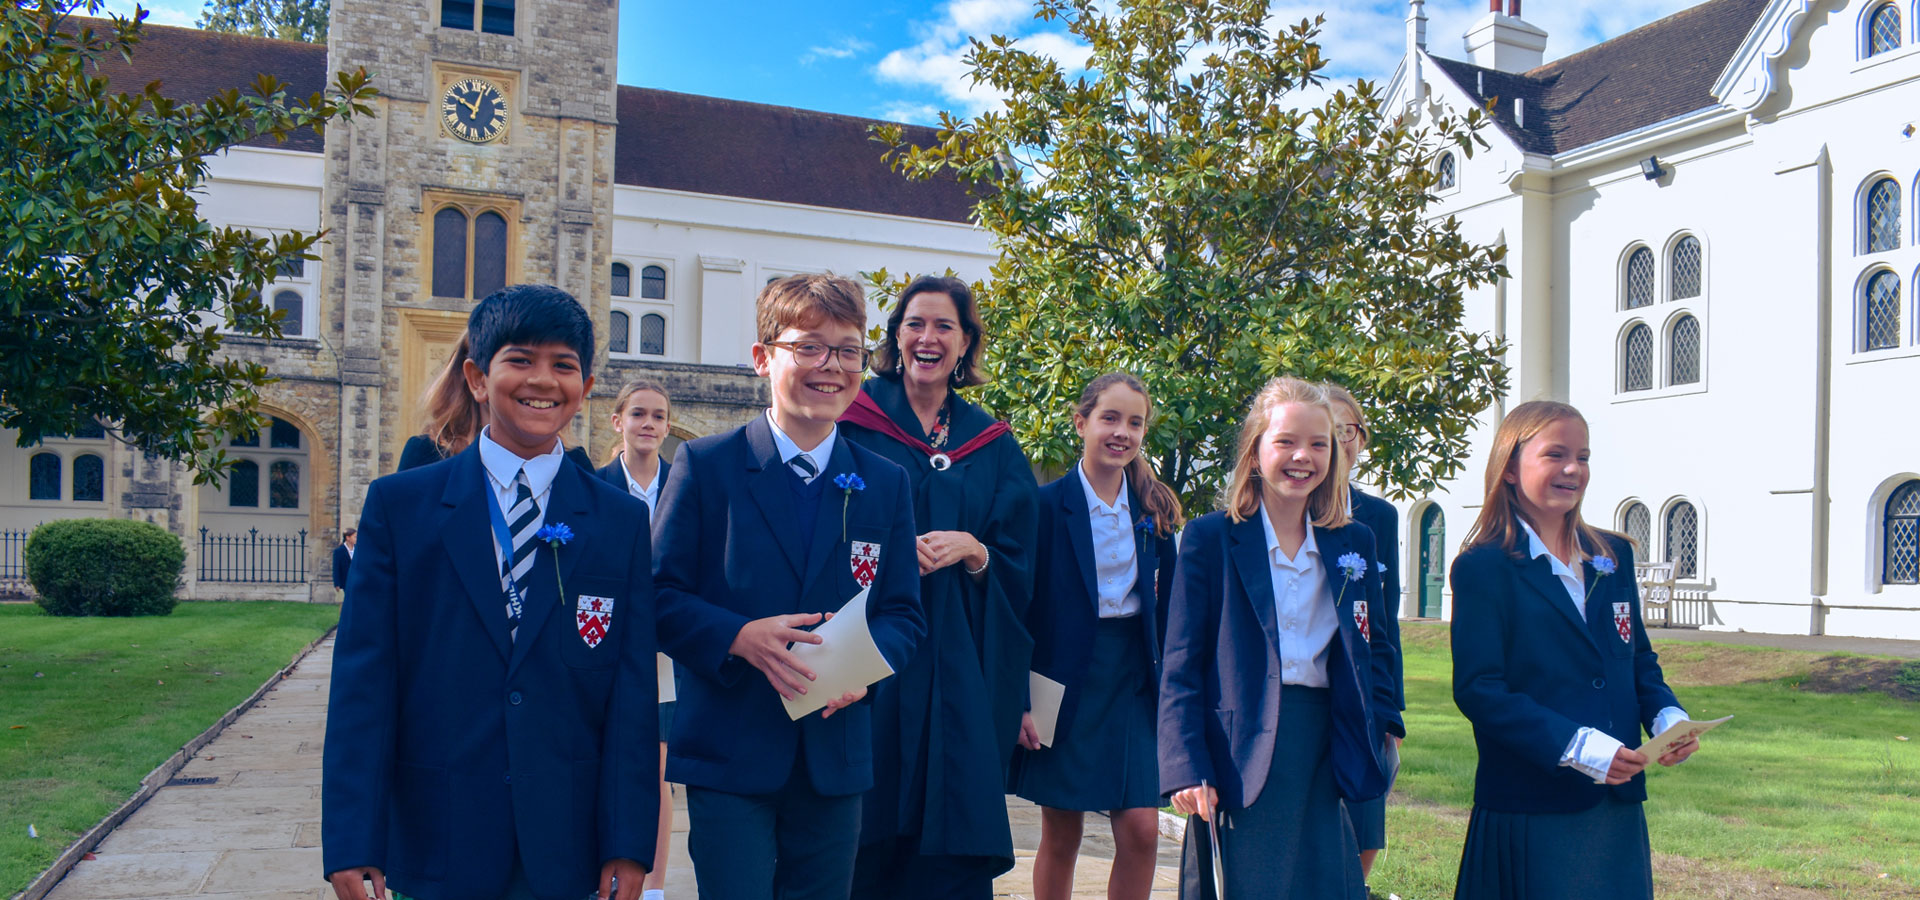 The head of Alleyn's school, Jane Lunnon, with pupils.